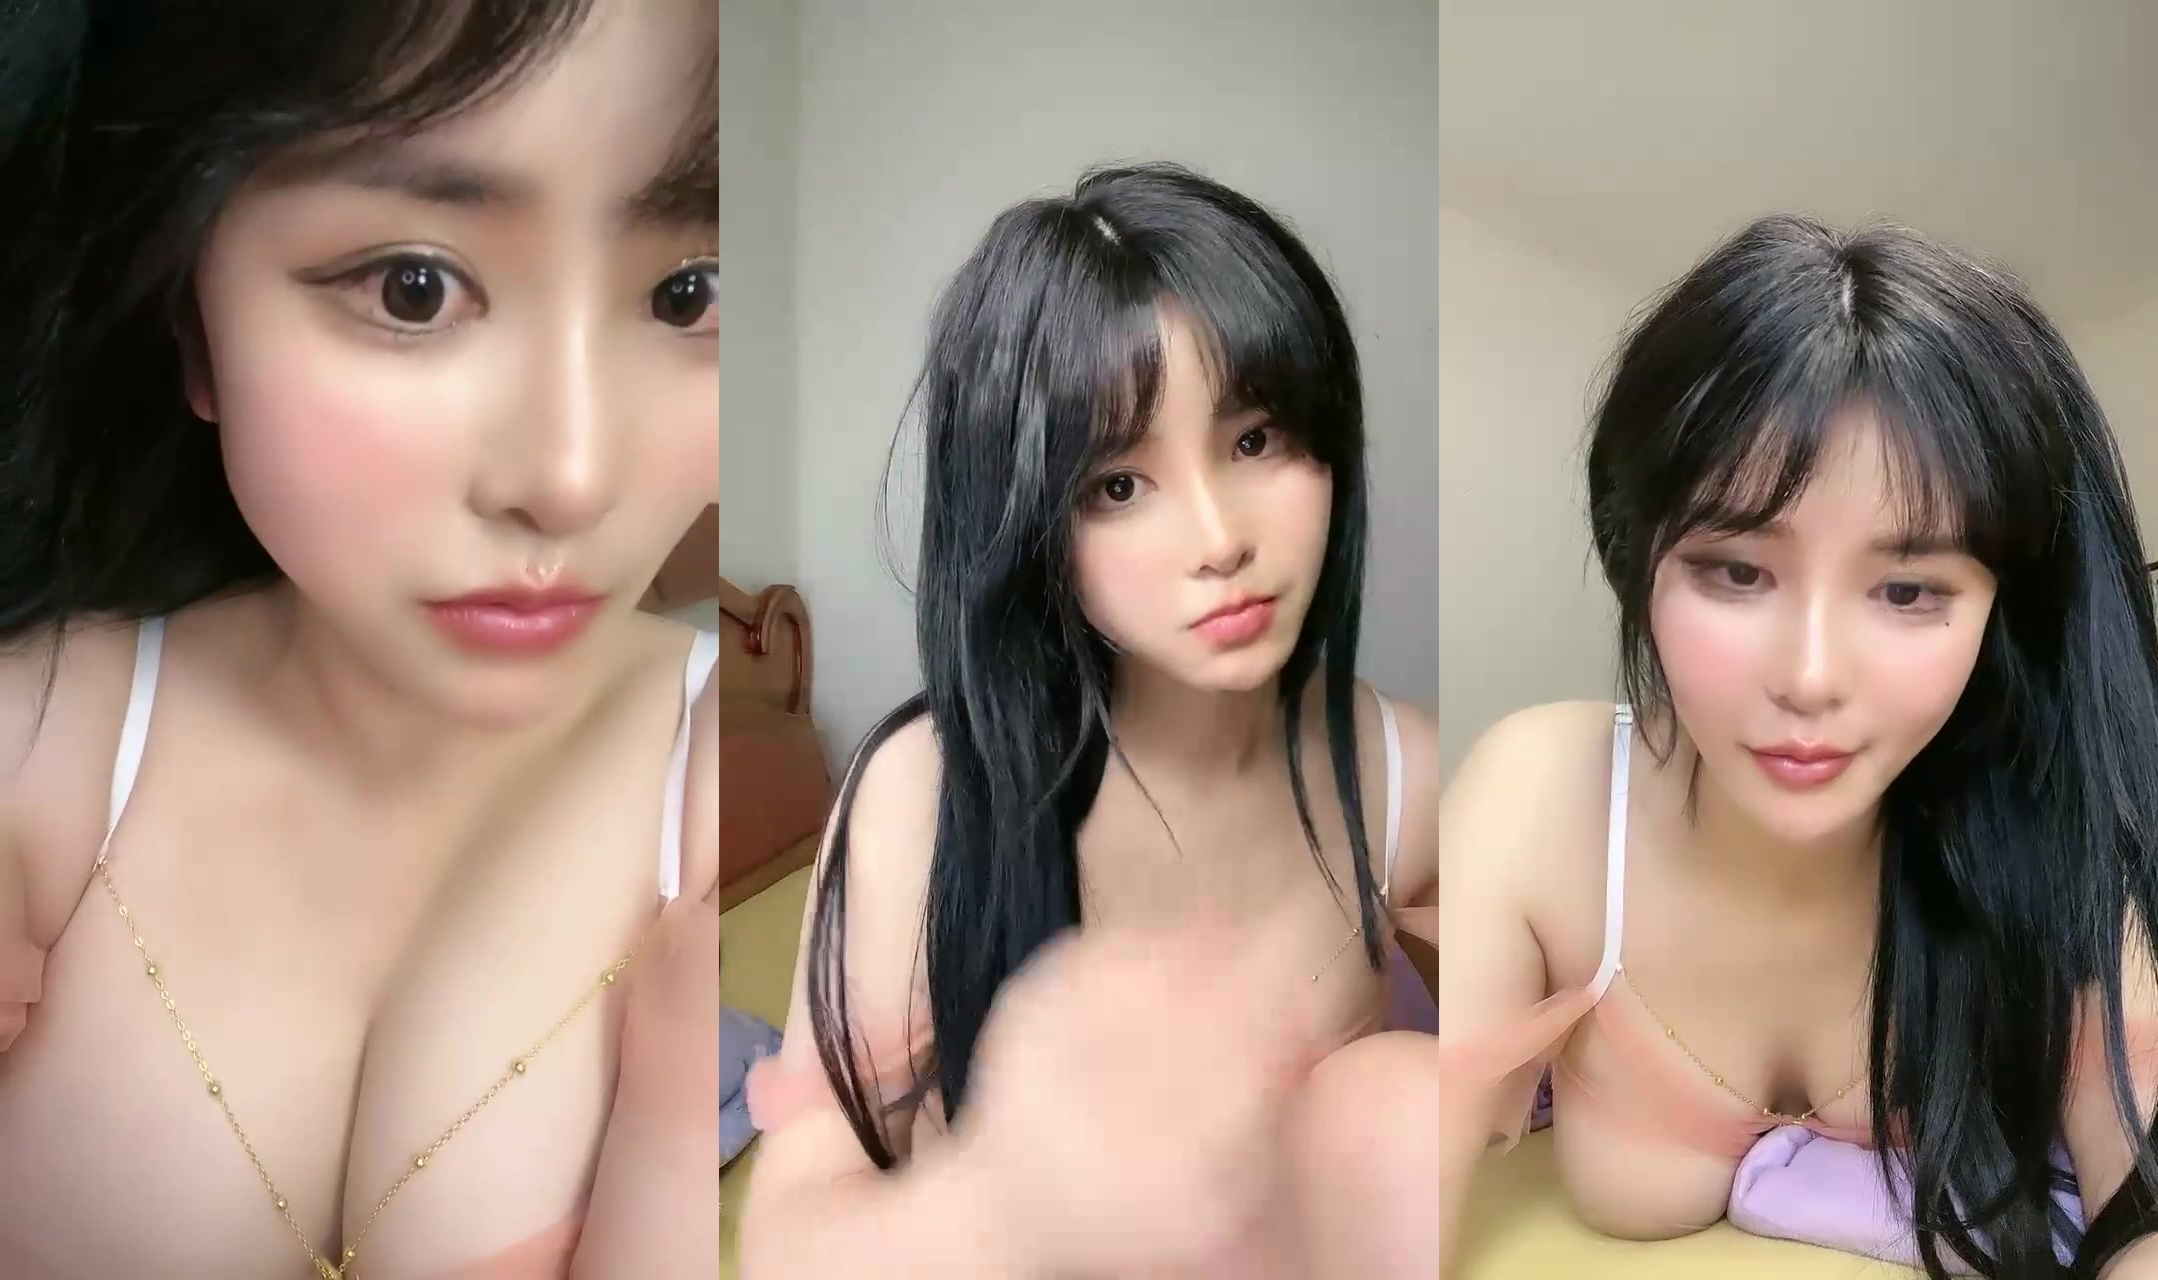 Netflix face girl, she is a beautiful girl, her body is not too good (2)